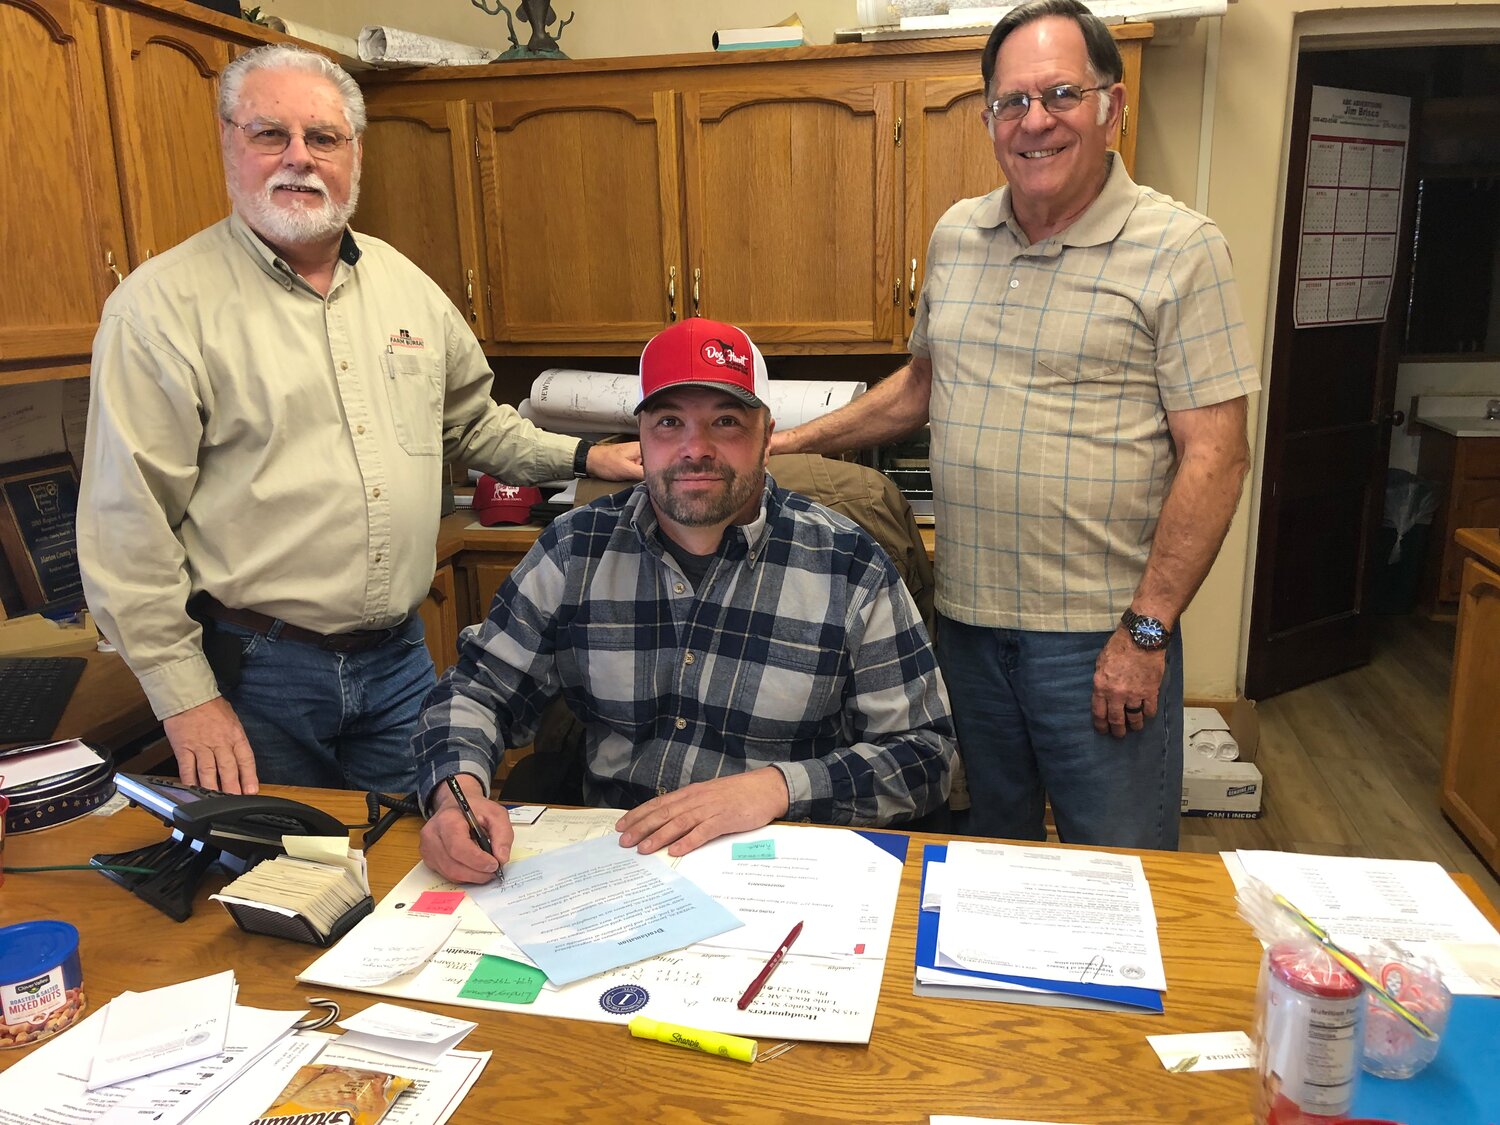 Newton County Judge Warren Campbell signed a proclamation making Feb. 5-9 Farm Bureau Week for Newton County. At the signing was Board Secretary Stan Taylor, left, and Board Member Larry Ochs.